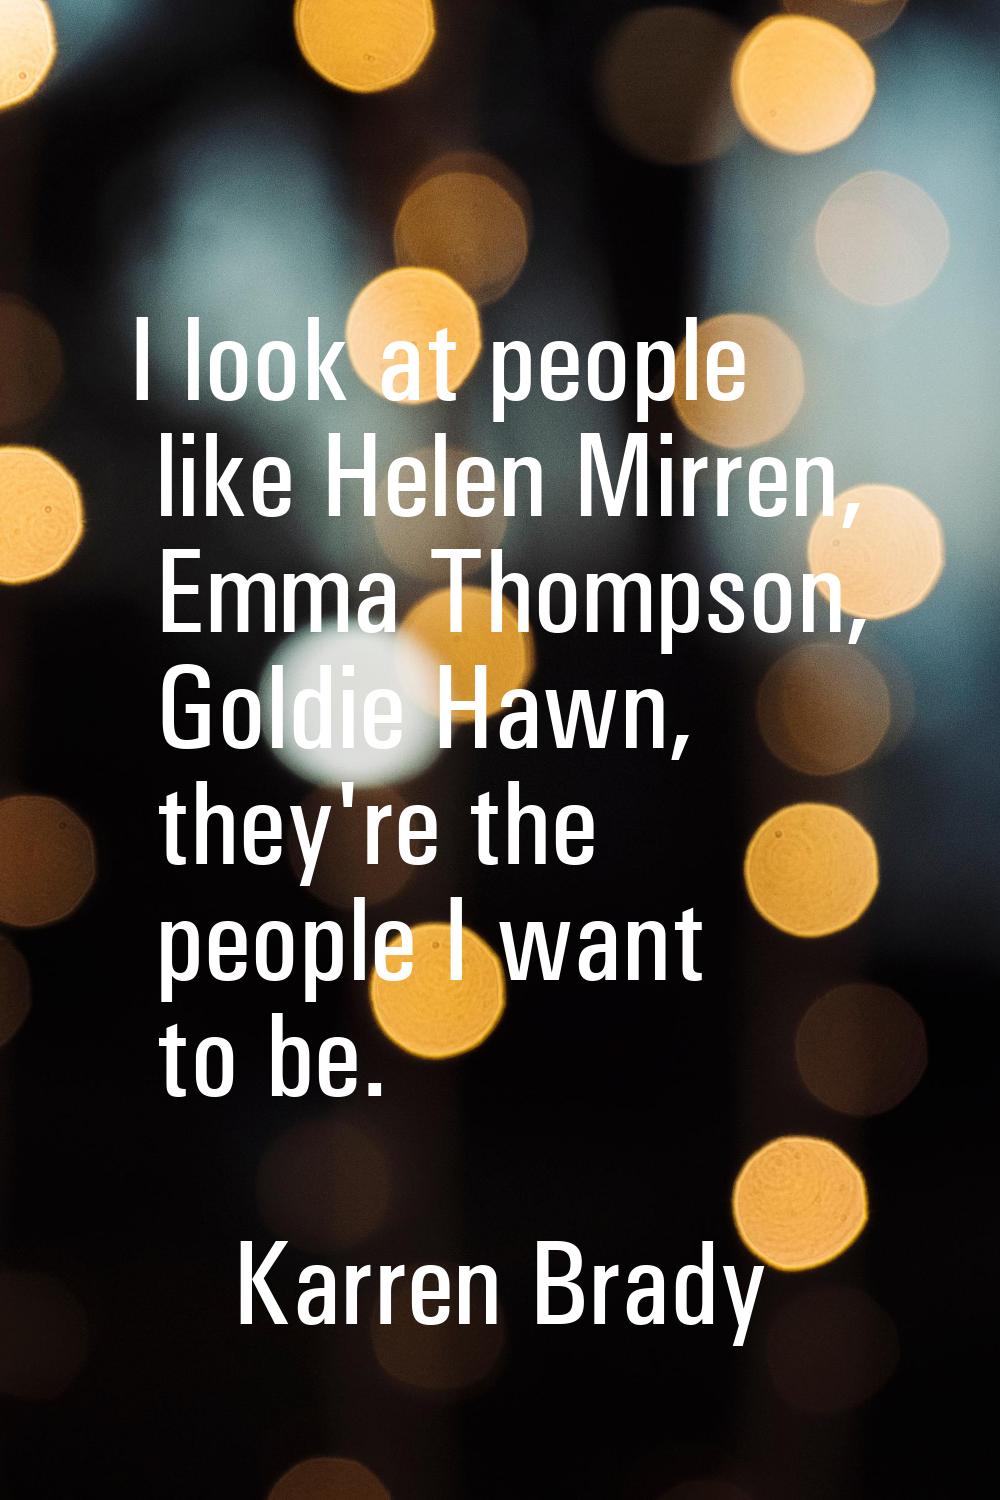 I look at people like Helen Mirren, Emma Thompson, Goldie Hawn, they're the people I want to be.